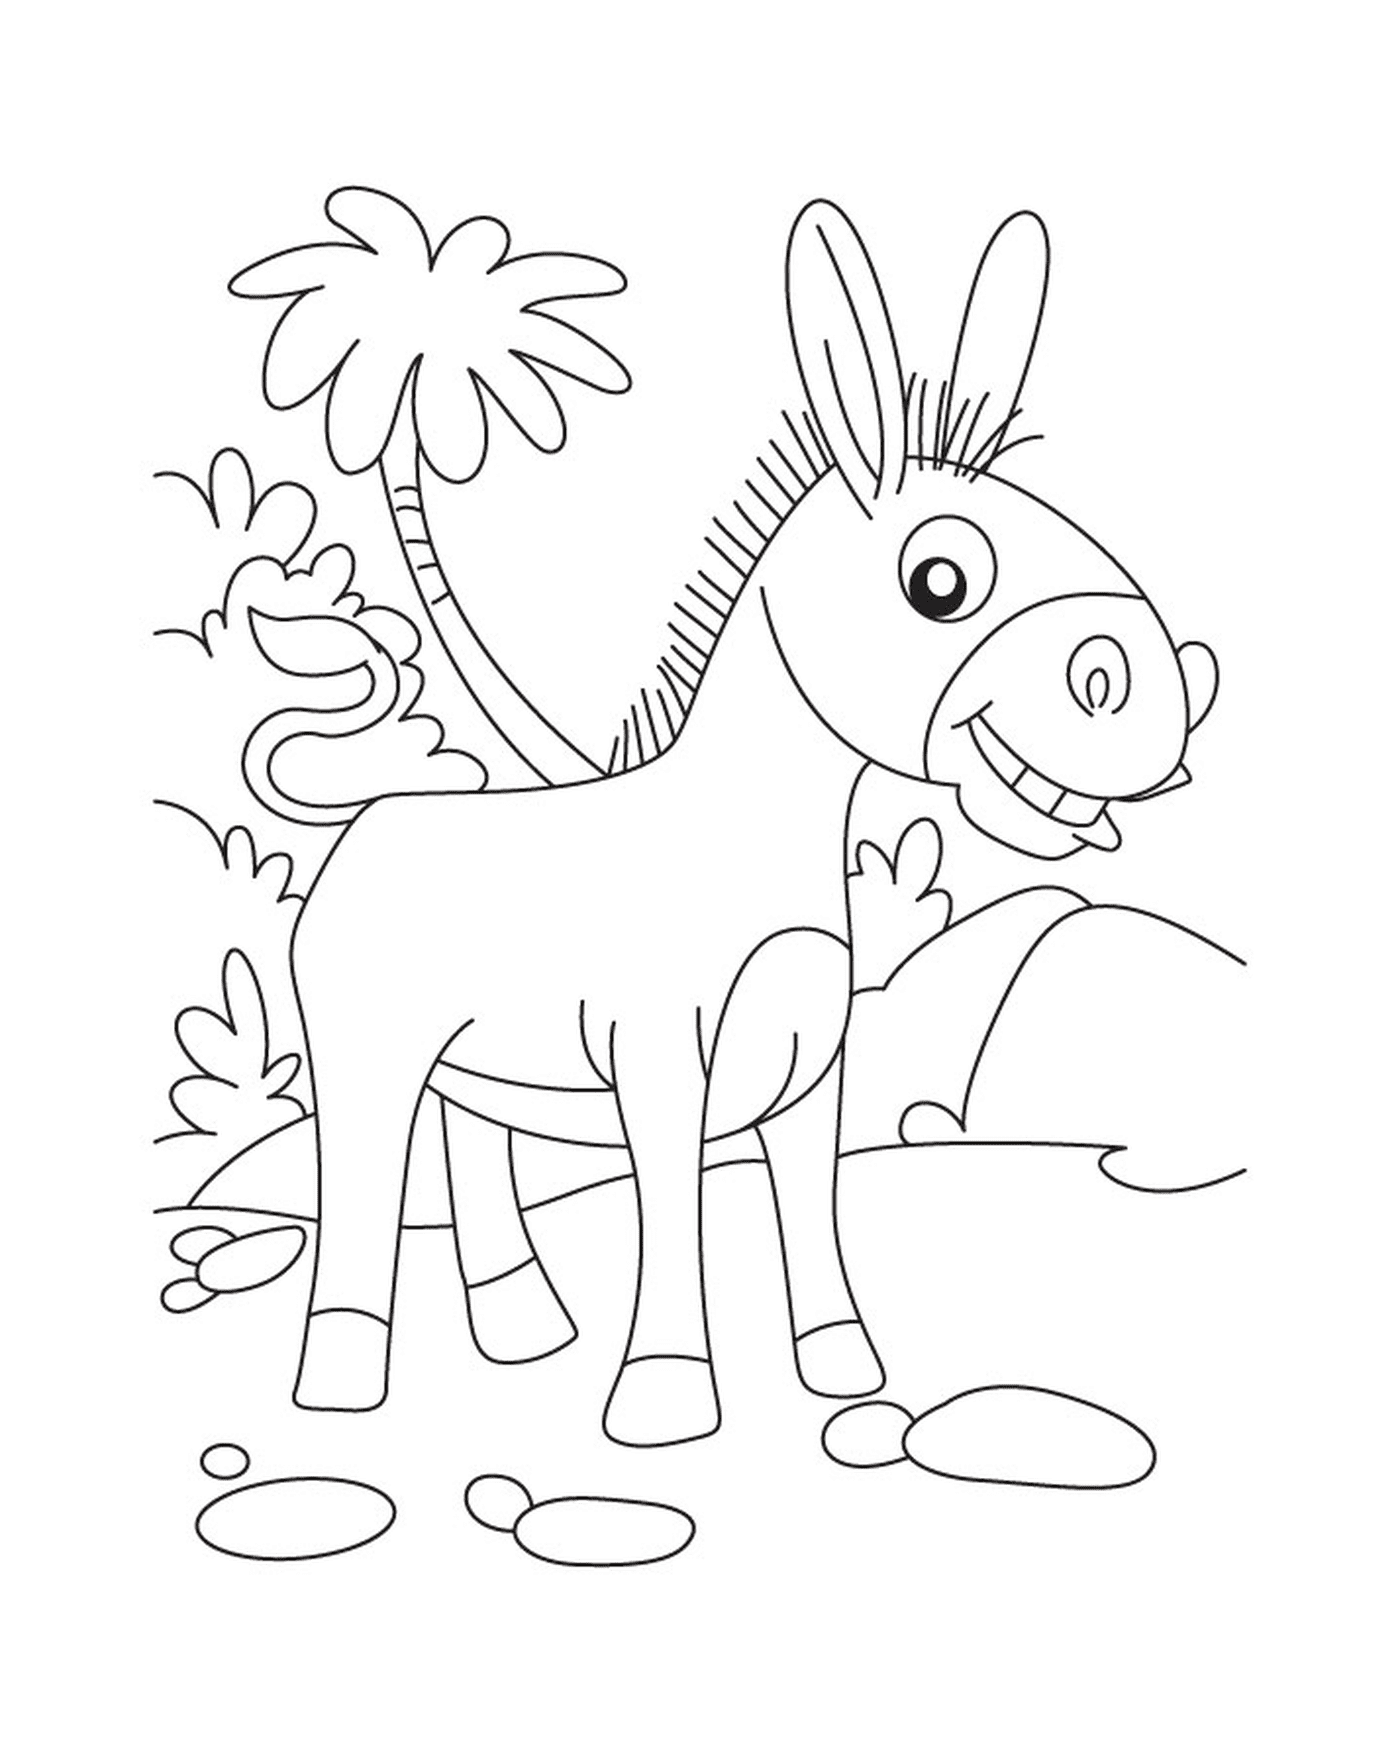  A donkey standing in the grass near a tree 